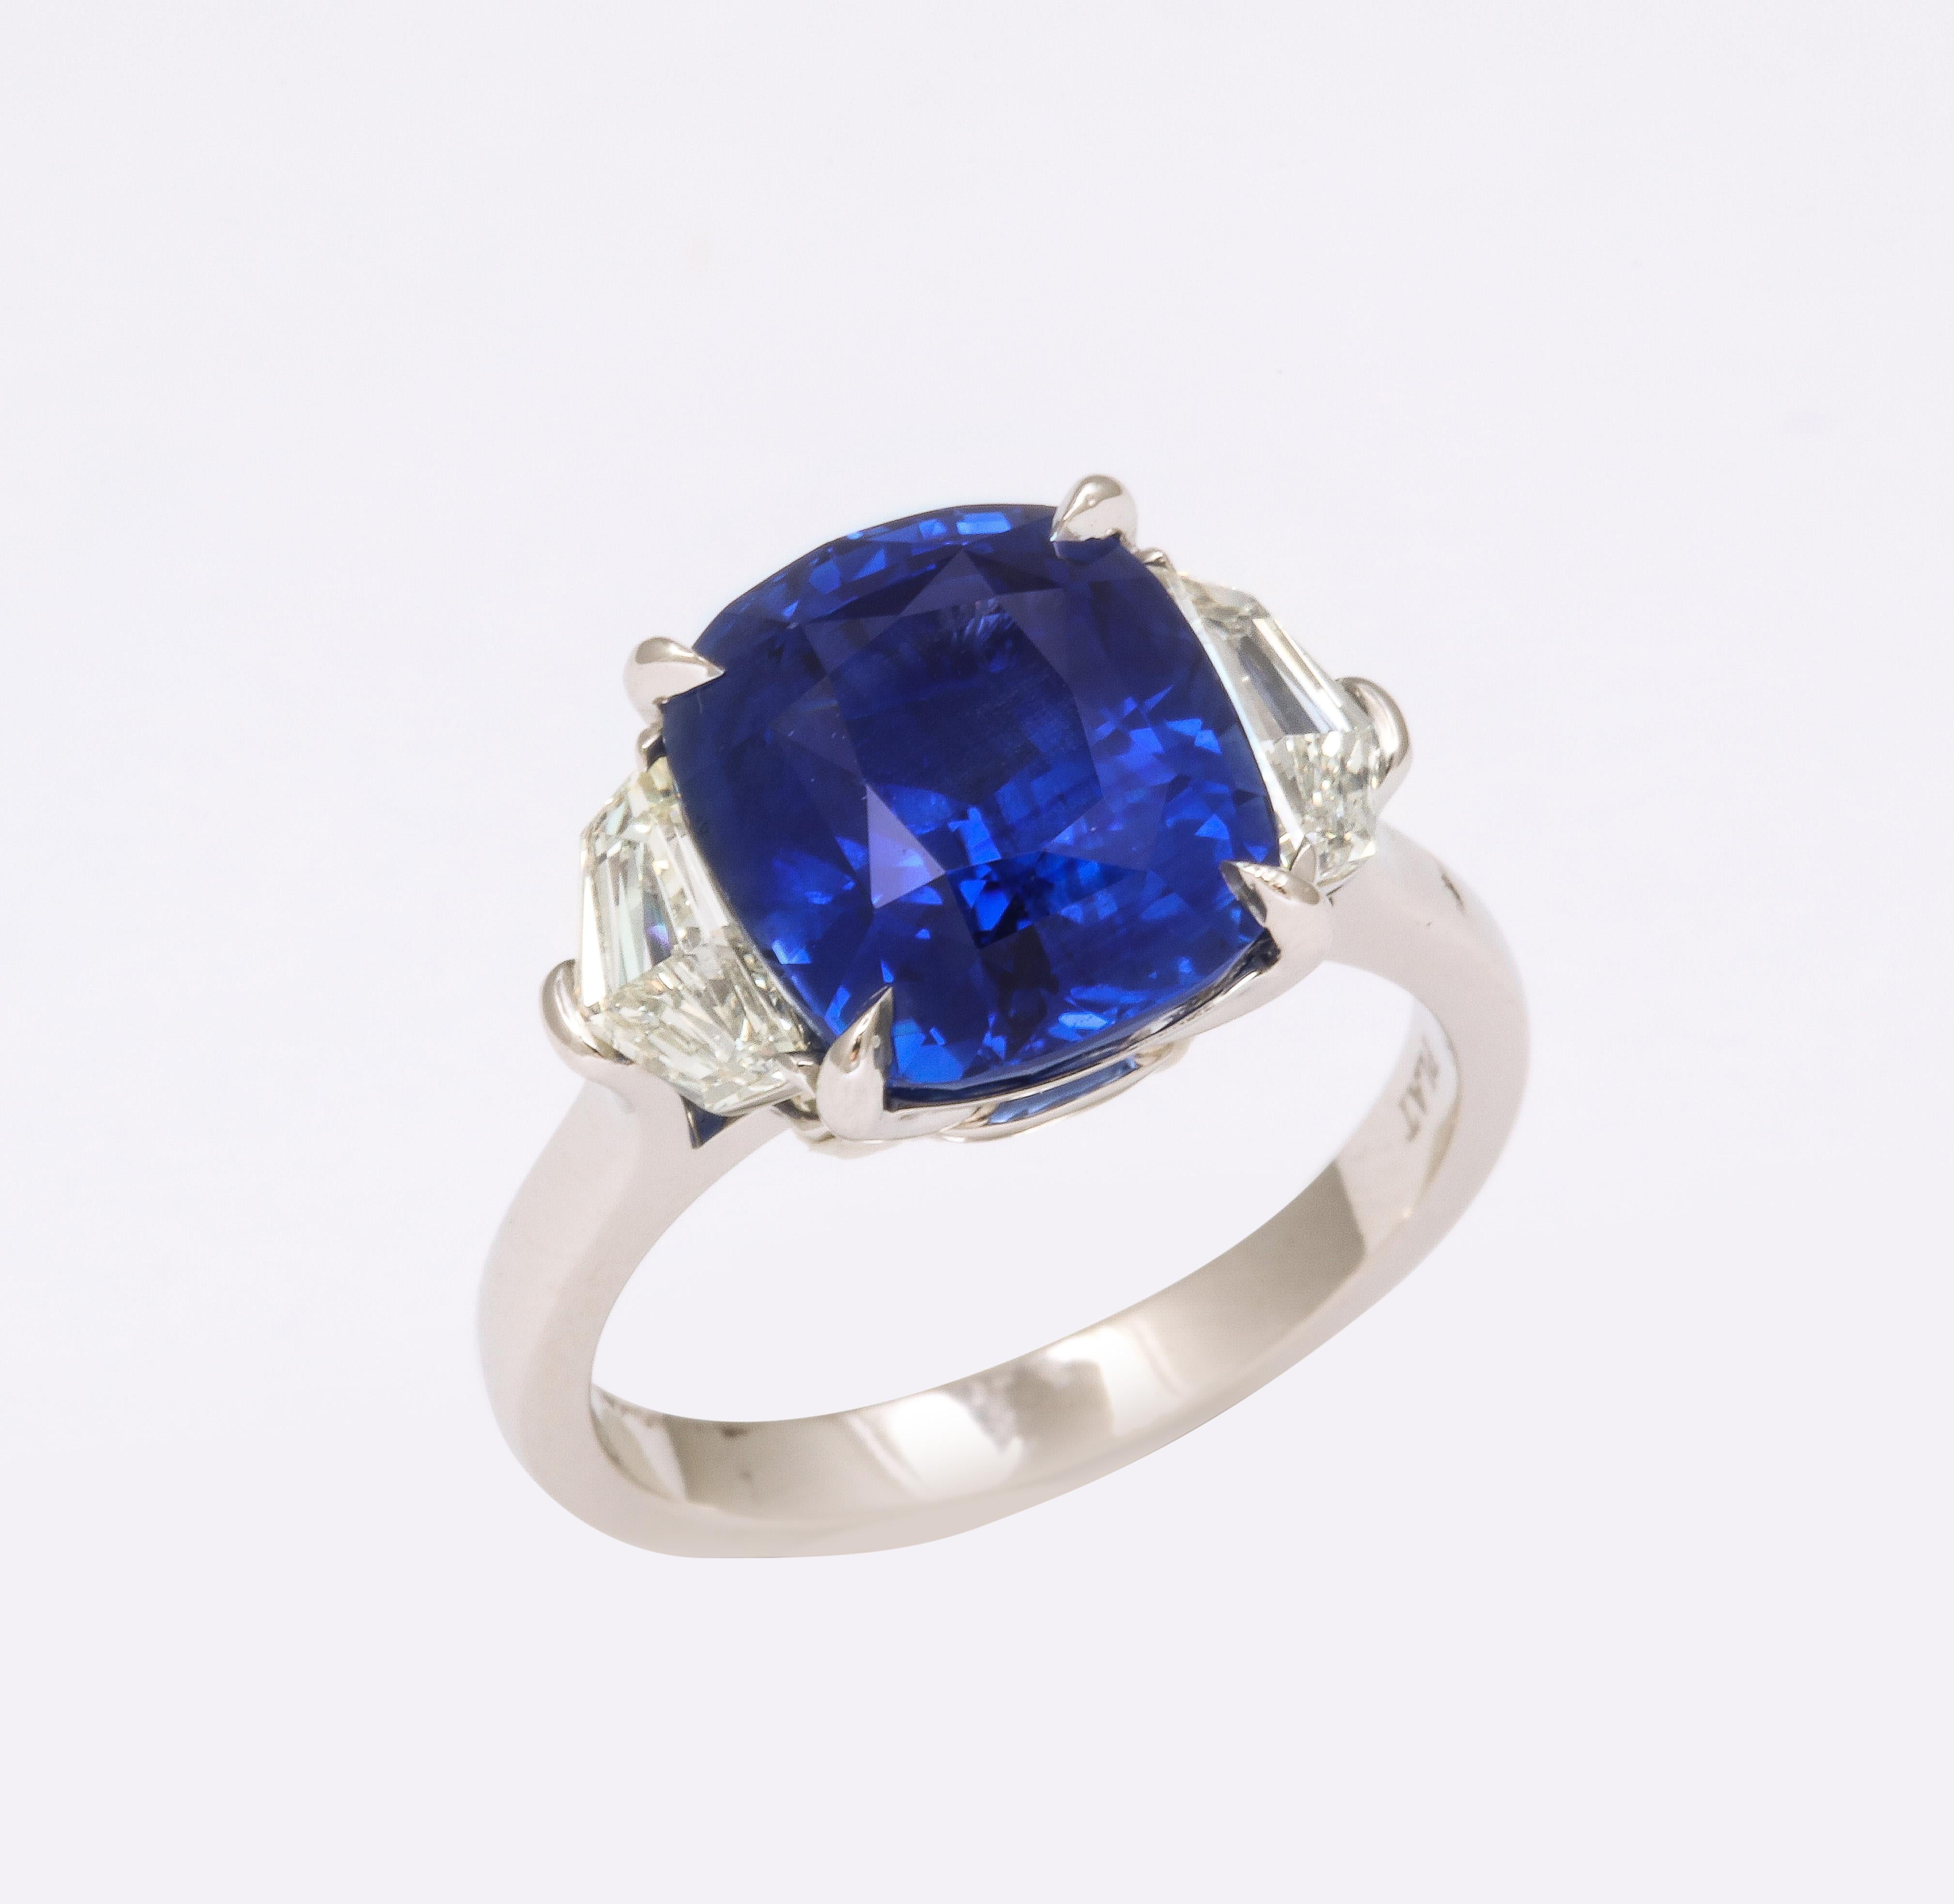 7 Carat Cushion Cut Sapphire and Diamond Ring For Sale 2